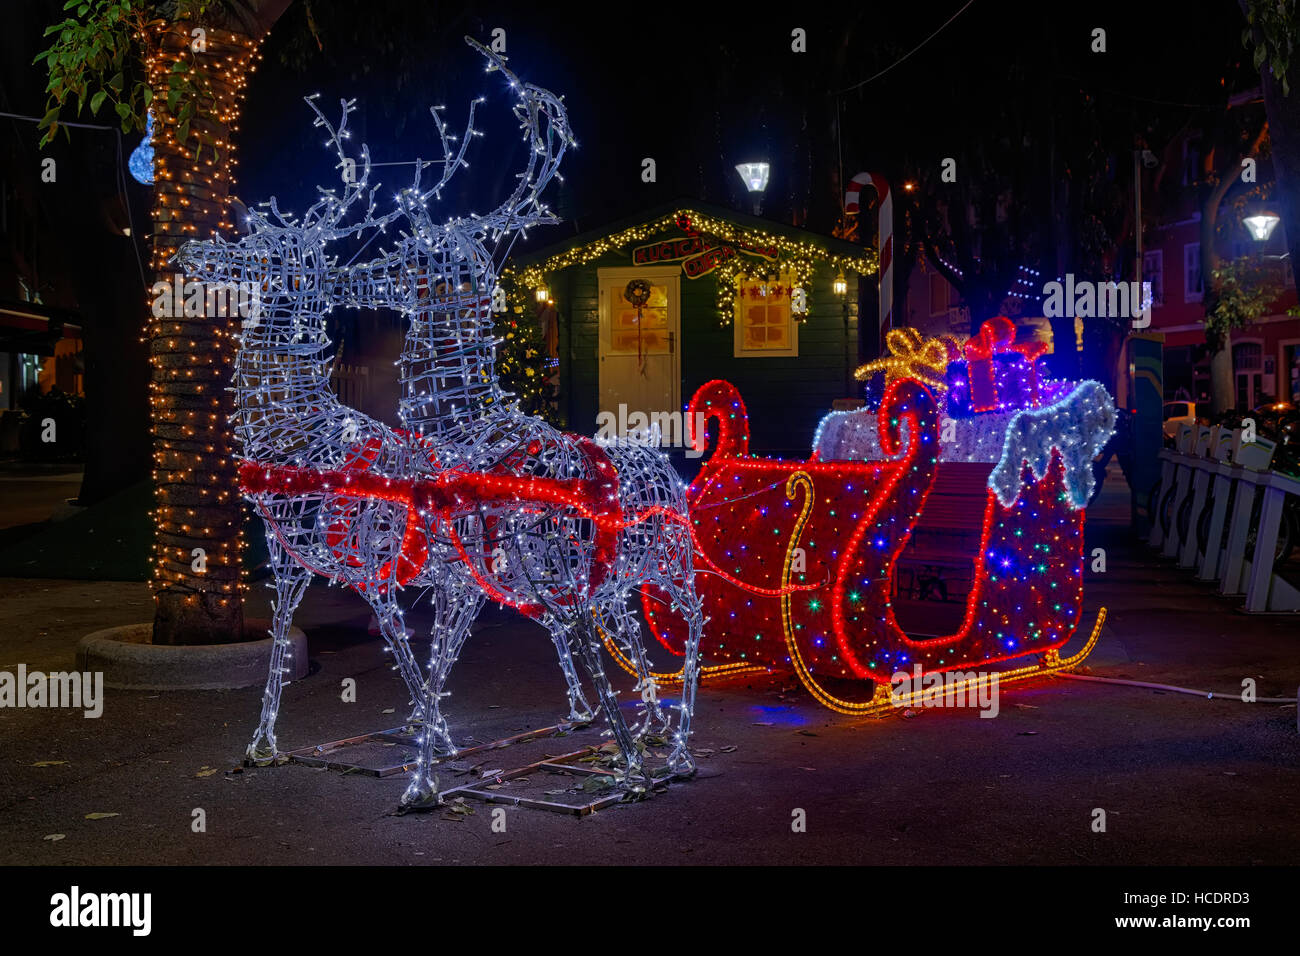 Santa Claus sleigh and two reindeer, Christmas decoration Stock Photo